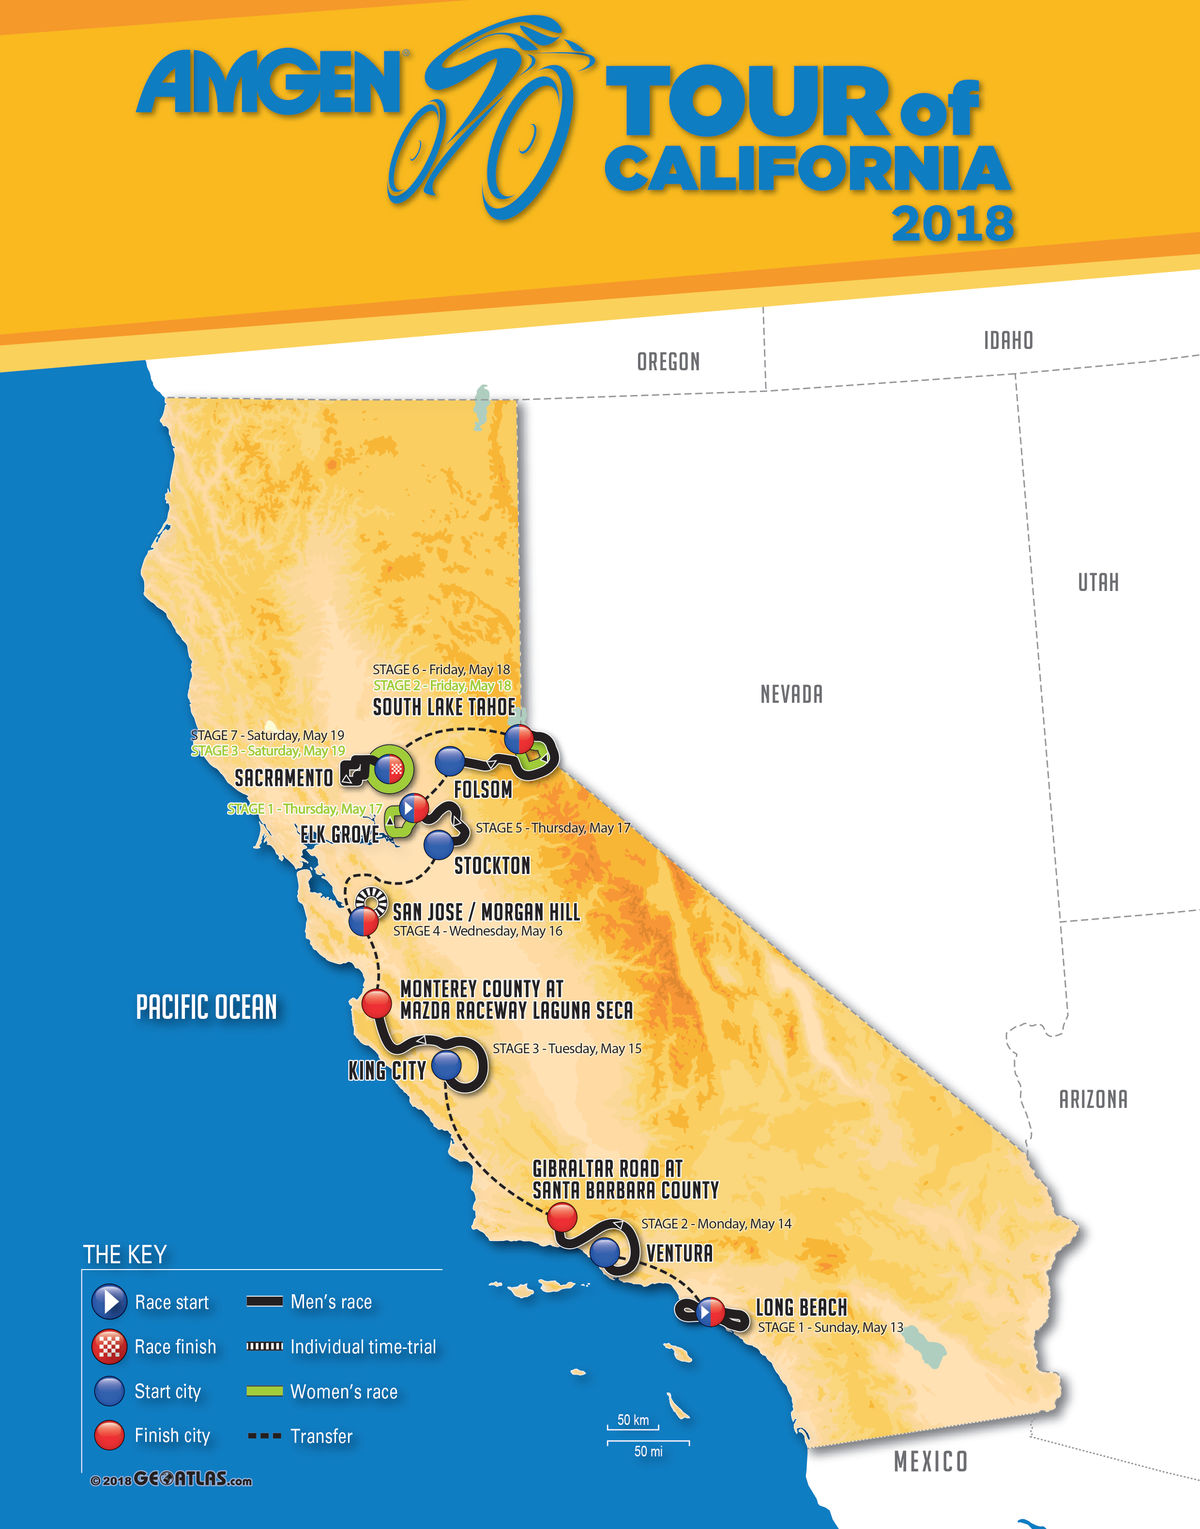 Amgen Tour of California 2018 Race Routes (Graphic: Business Wire)